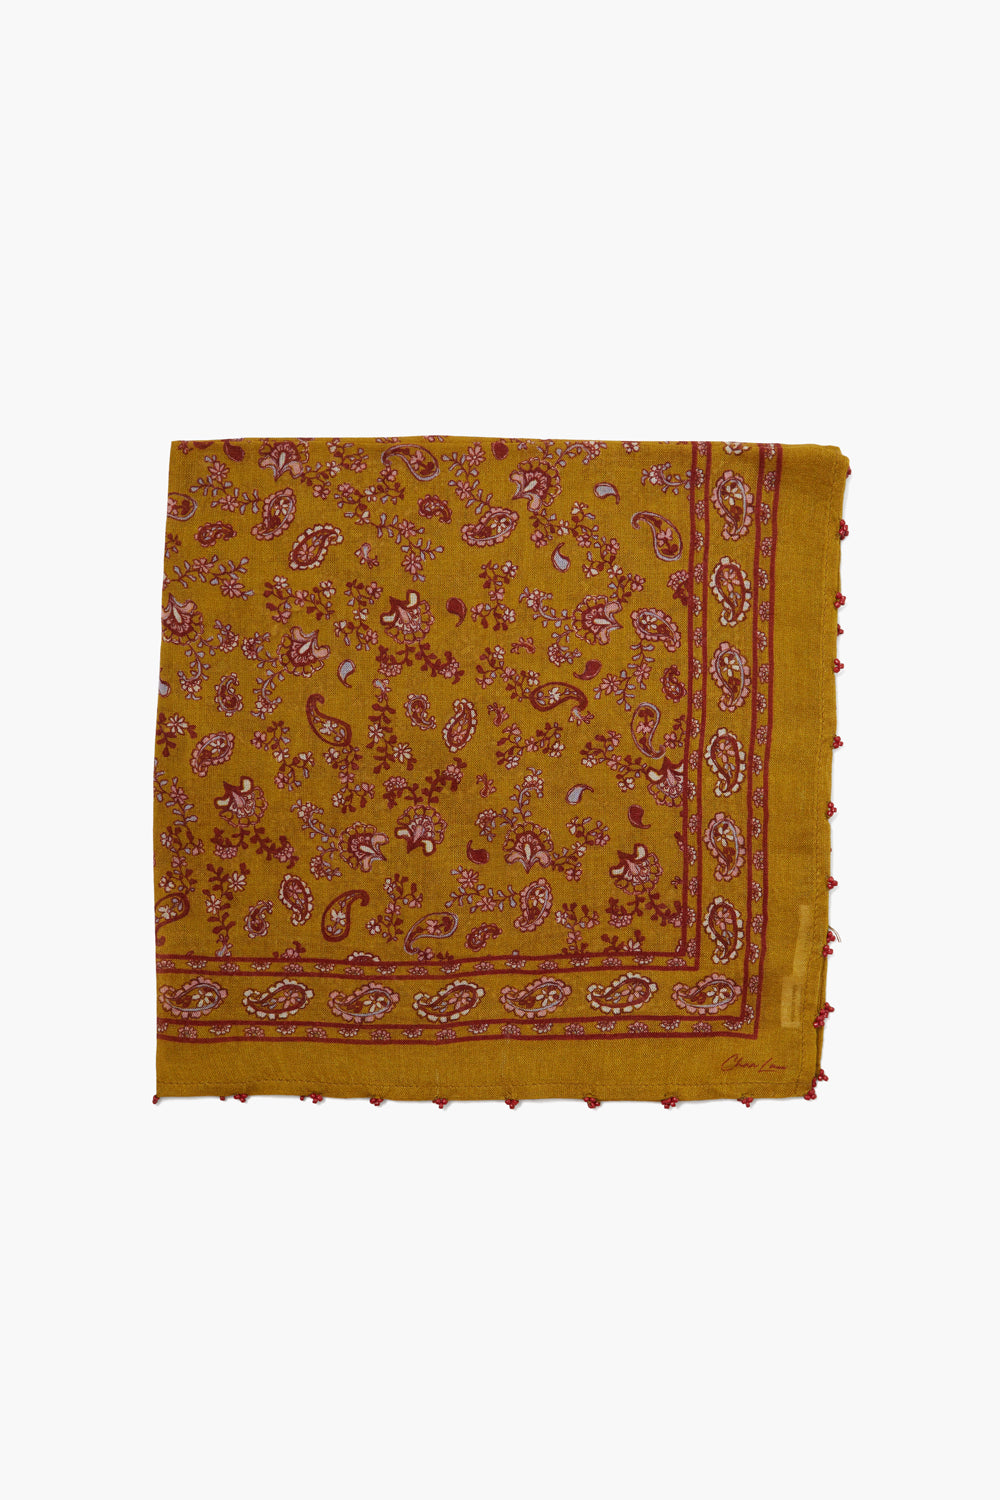 PAISLEY BANDANA WITH SEED BEAD EDGES - CHAI TEA - Kingfisher Road - Online Boutique